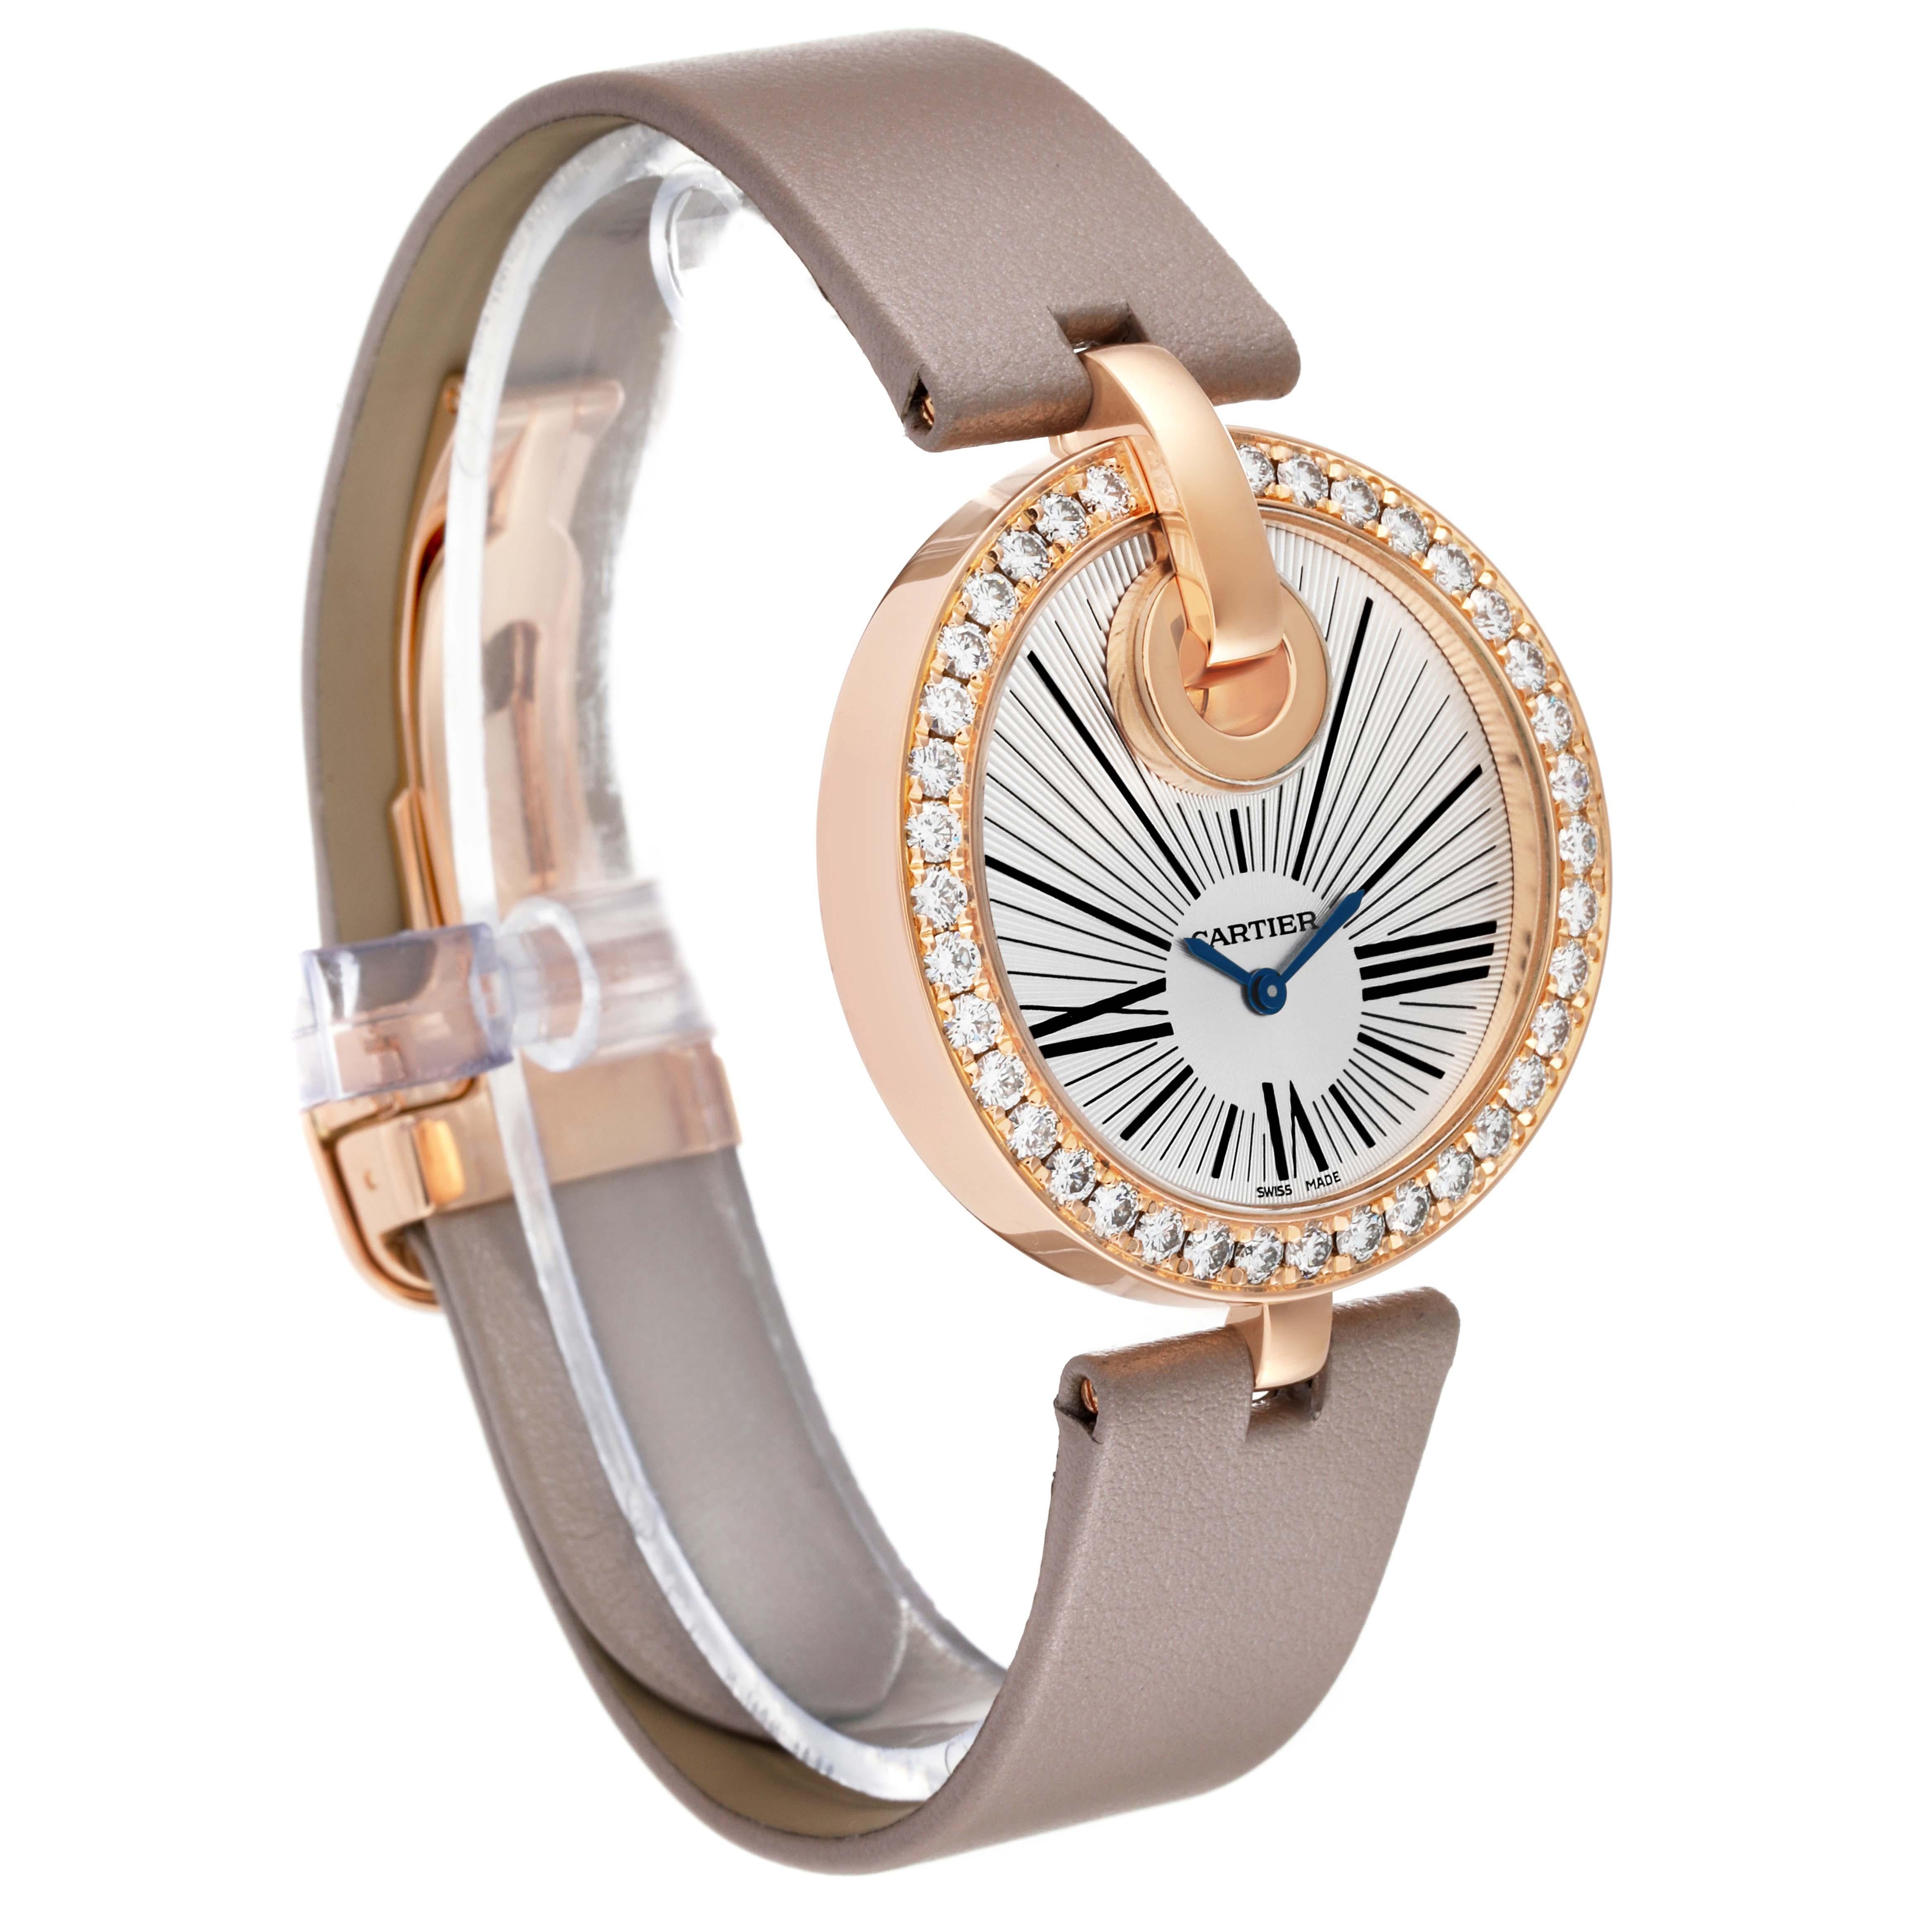 Cartier Captive Rose Gold Diamond Ladies Watch WG600011 For Sale 2